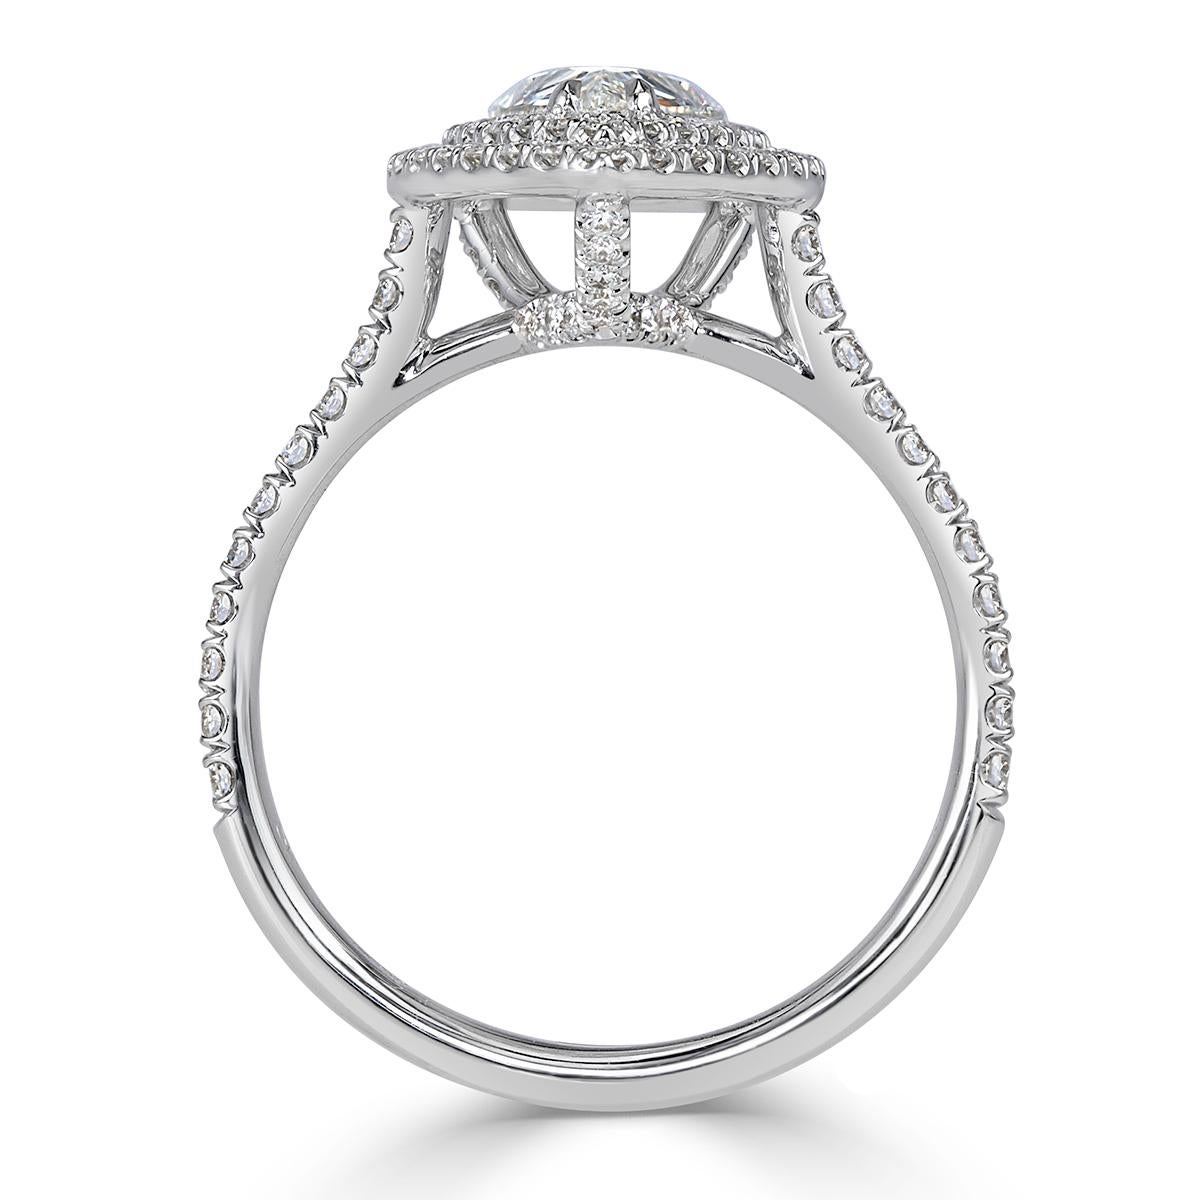 This mesmerizing pear shaped diamond engagement ring showcases an exquisite 1.06ct pear shaped center diamond, GIA certified at D-SI2. It is accented by a double halo of round brilliant cut diamonds as well as one row of shimmering diamonds micro